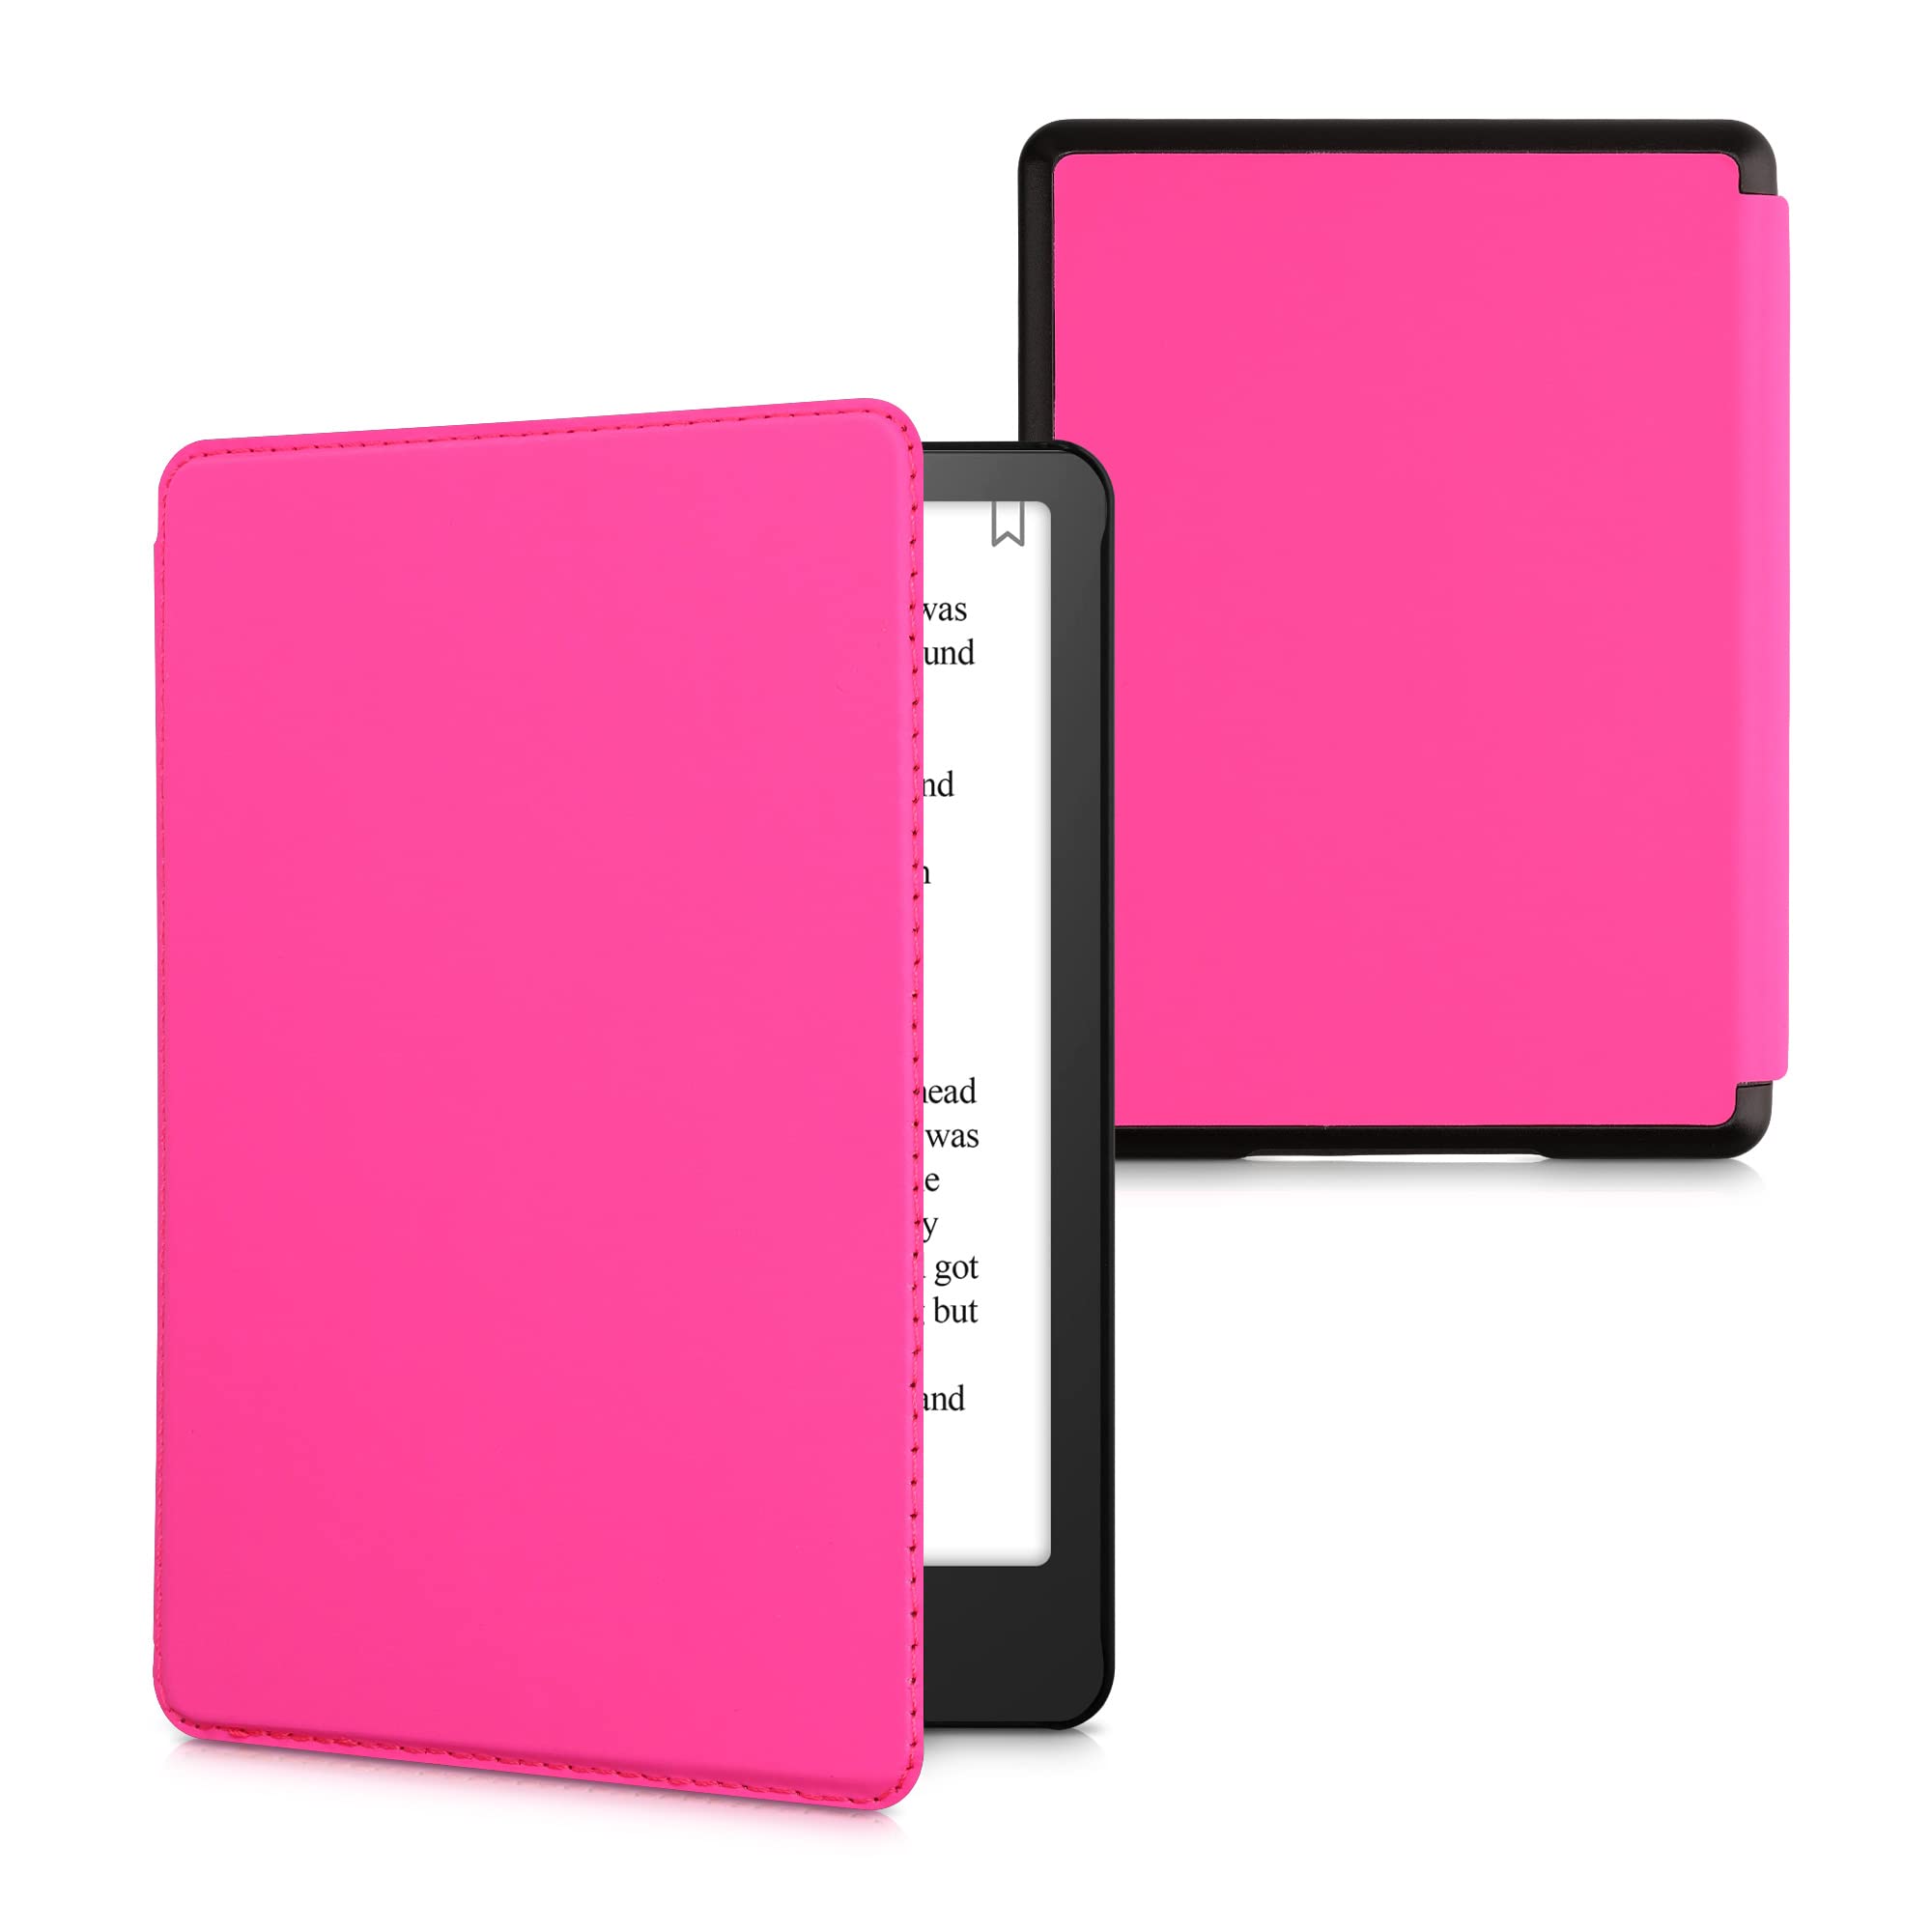 kwmobile Case Compatible with Amazon Kindle Paperwhite 11. Generation 2021 Case - Synthetic Leather e-Reader Cover with Strap - Neon Pink